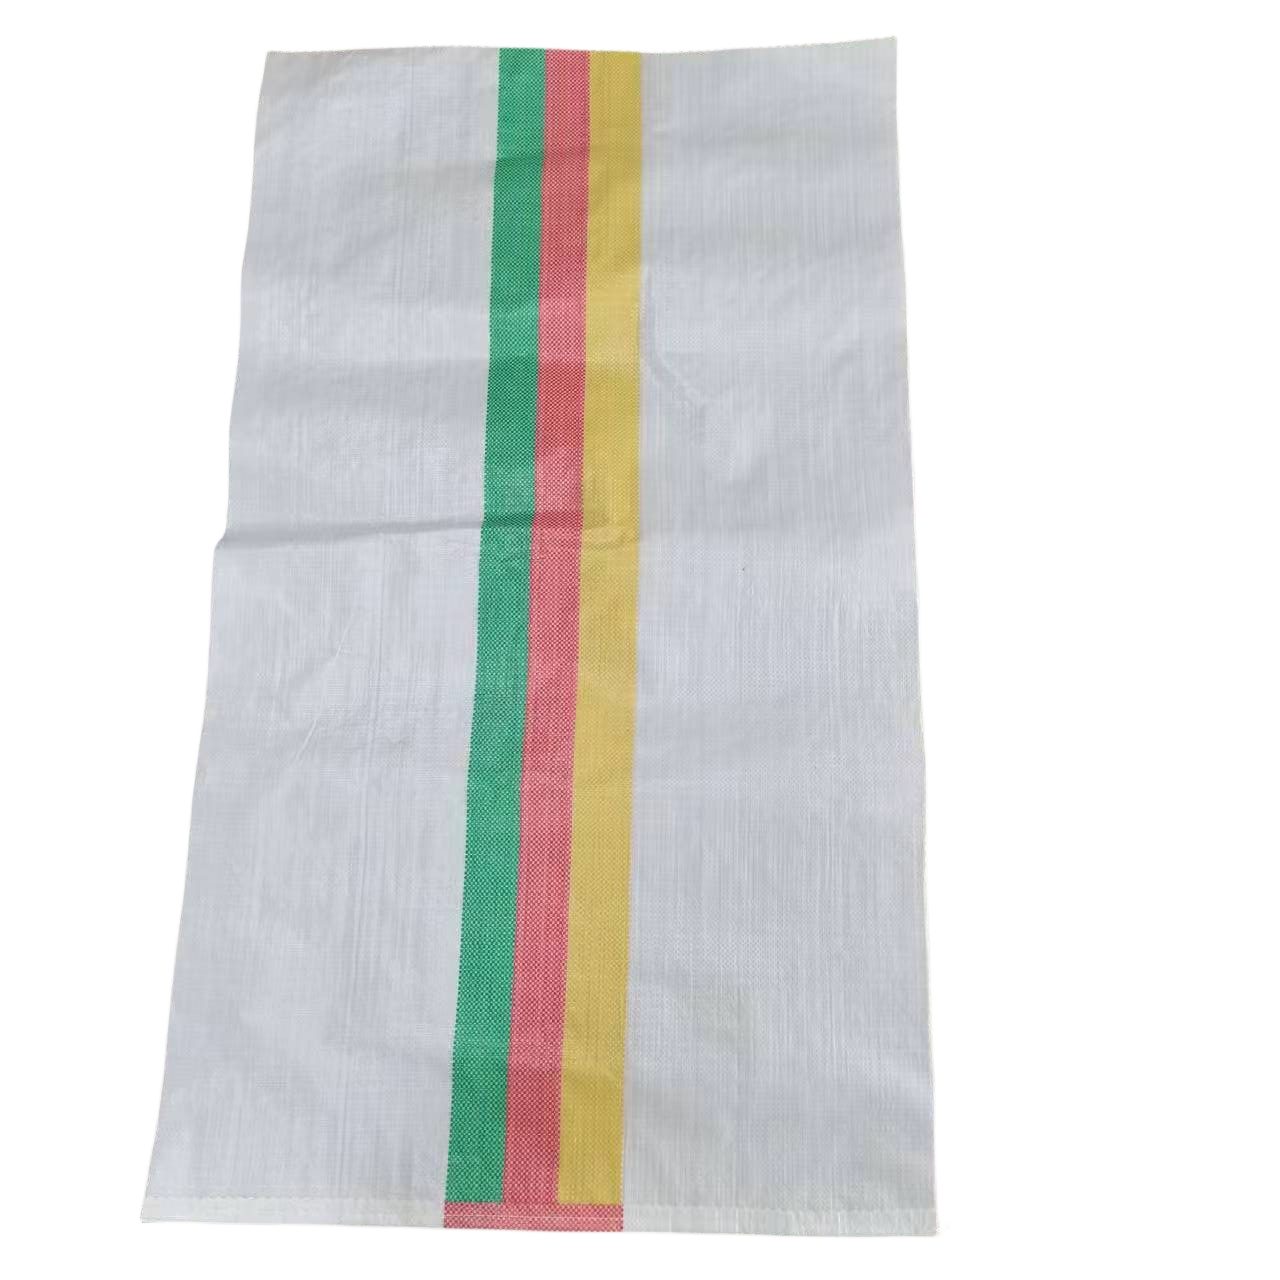 Large capacity durable woven polypropylene feed bags with colorful stripes